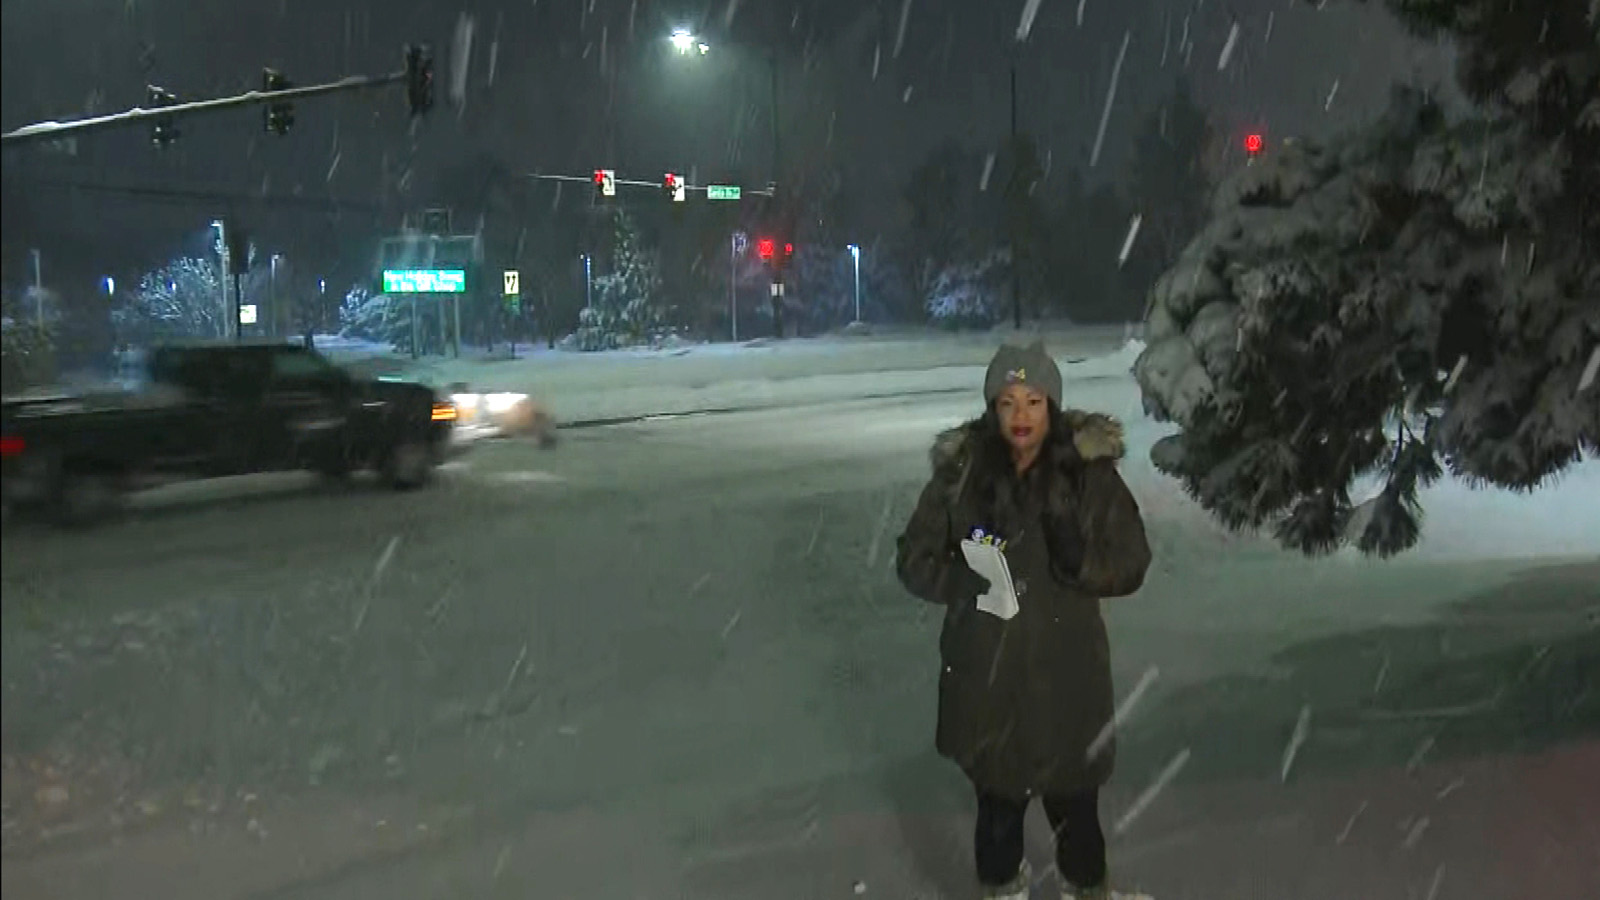 CBS4's Mekialaya White reports in Denver on Tuesday morning in the snow.